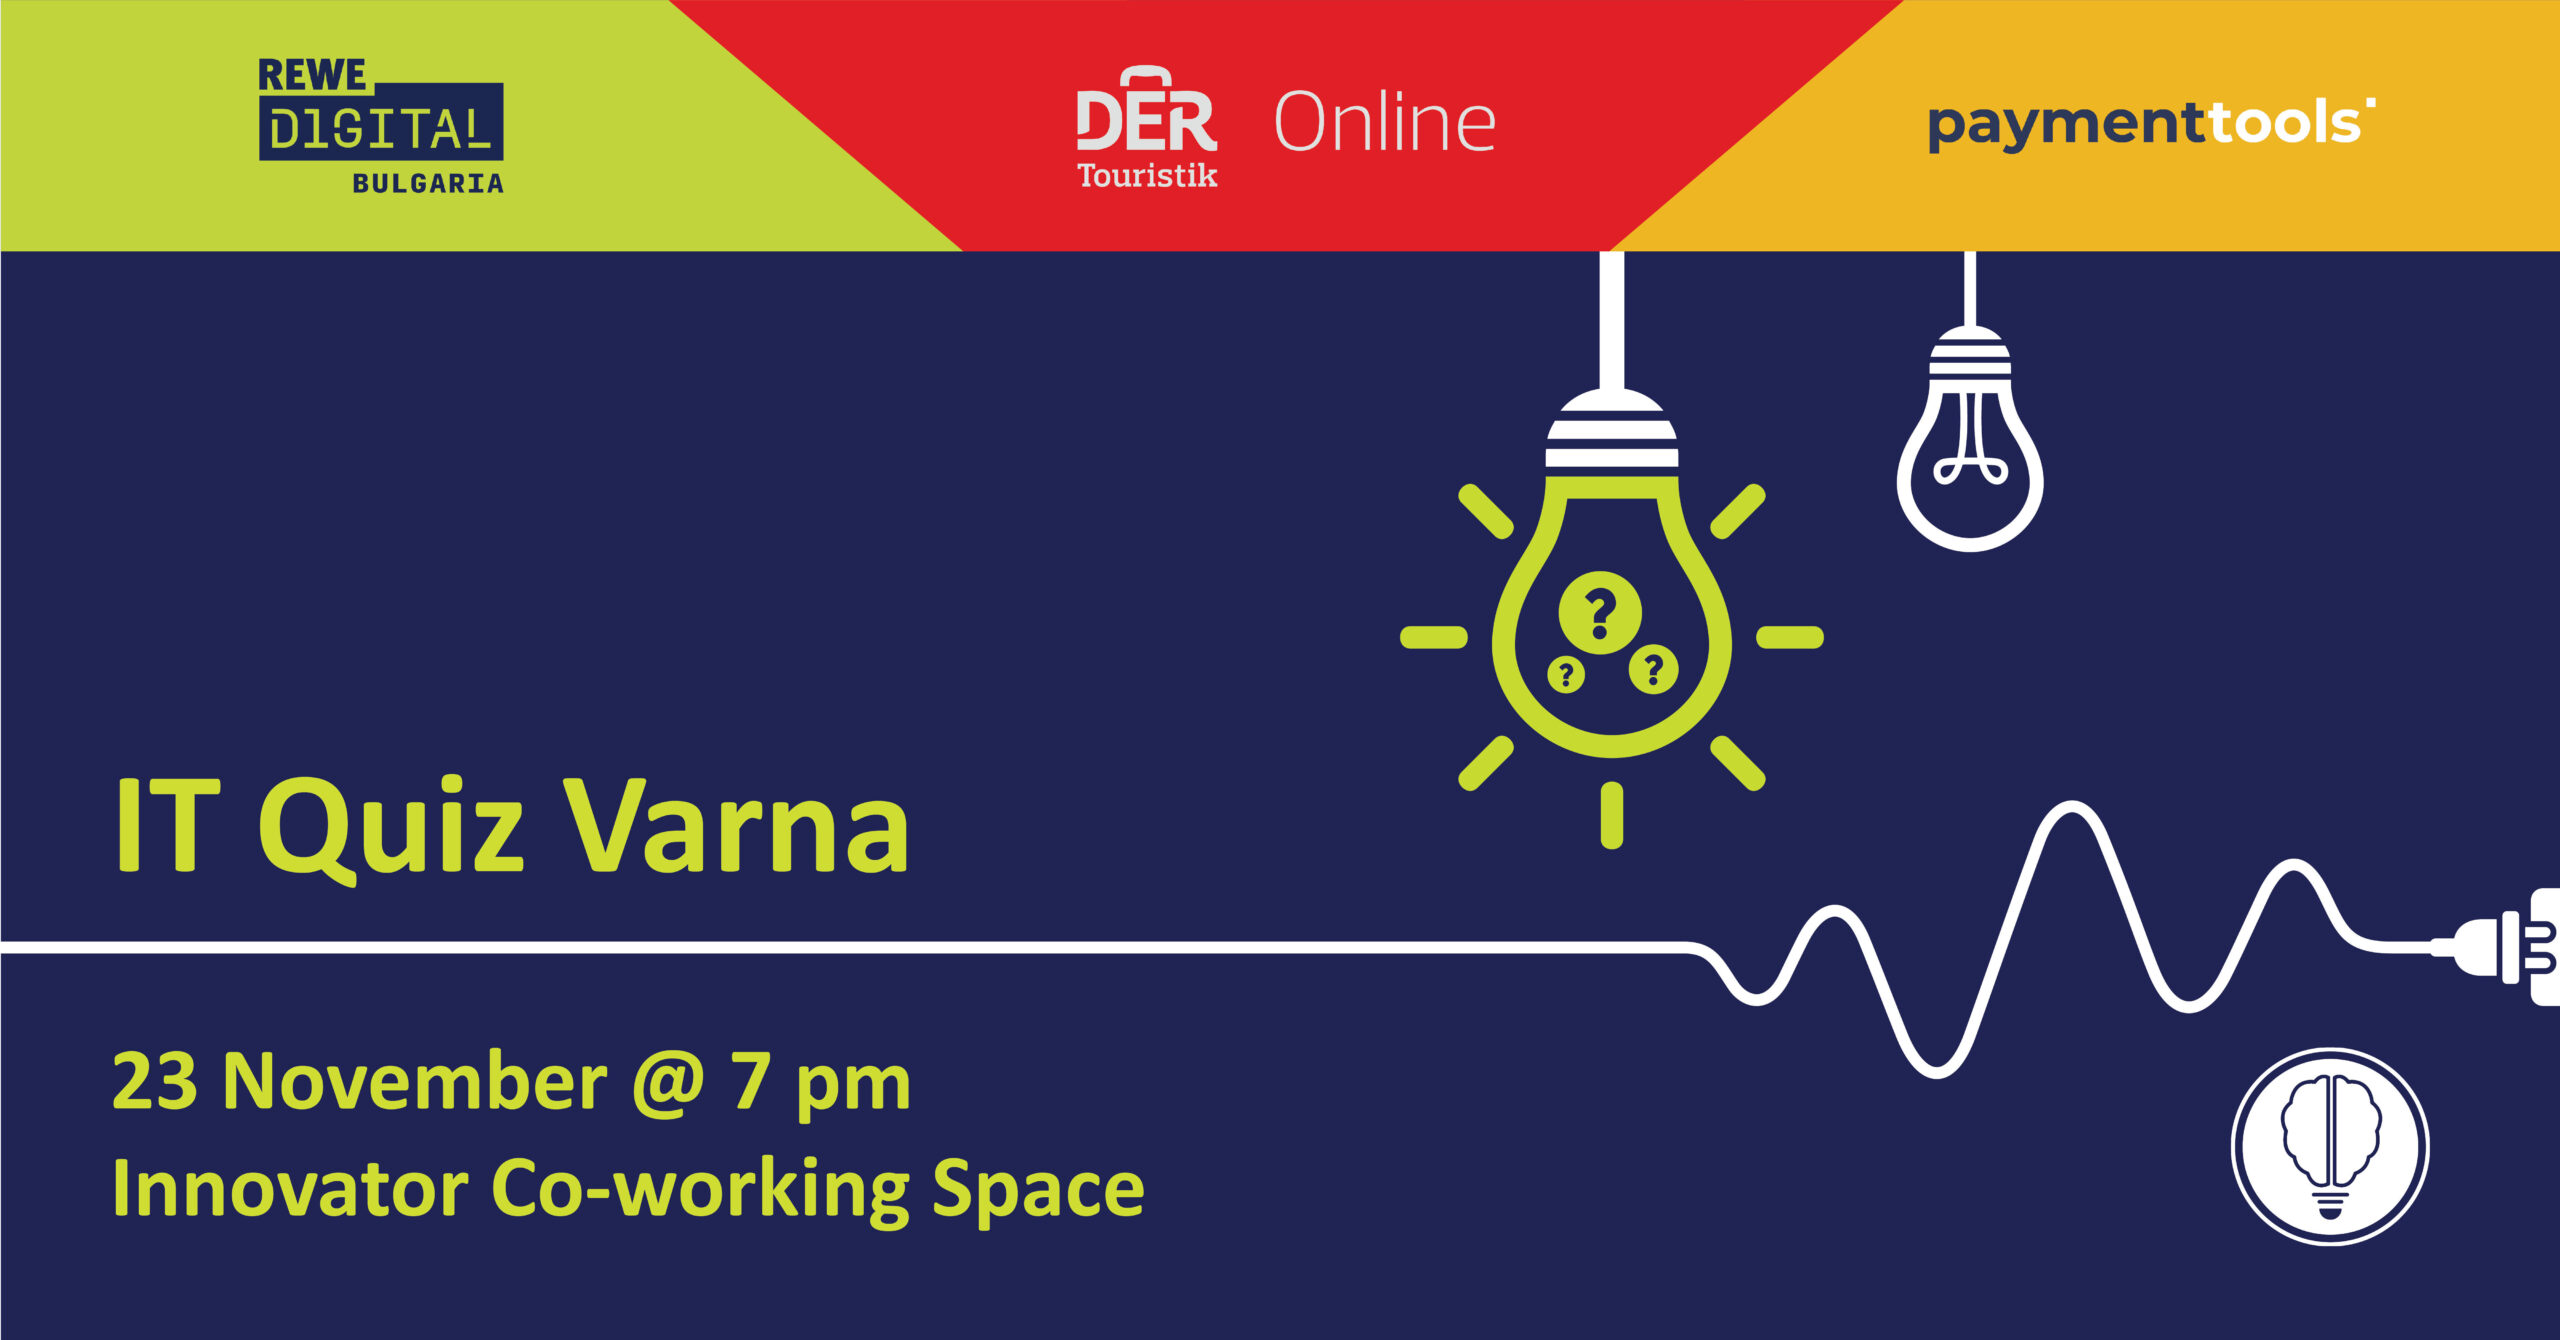 [CANCELLED] IT Quiz by REWE digital Bulgaria 13 | Innovator Coworking Space